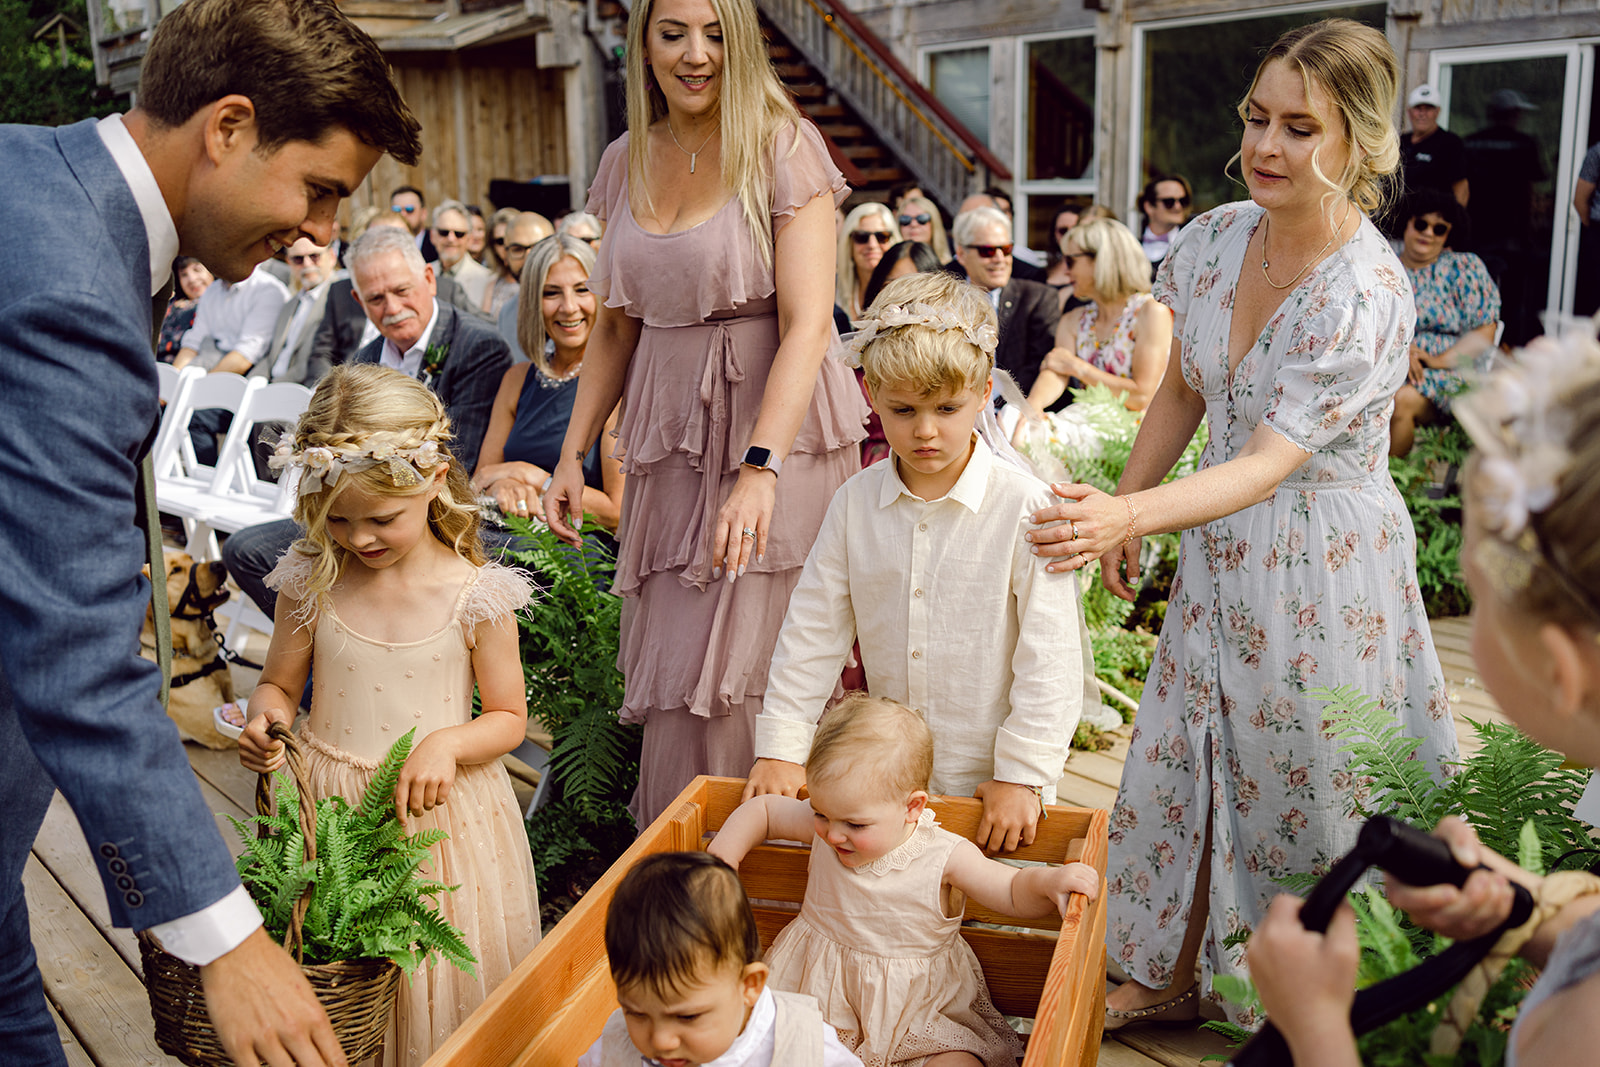 flower carriers and wedding kids coming down the aisle with kids in wagon